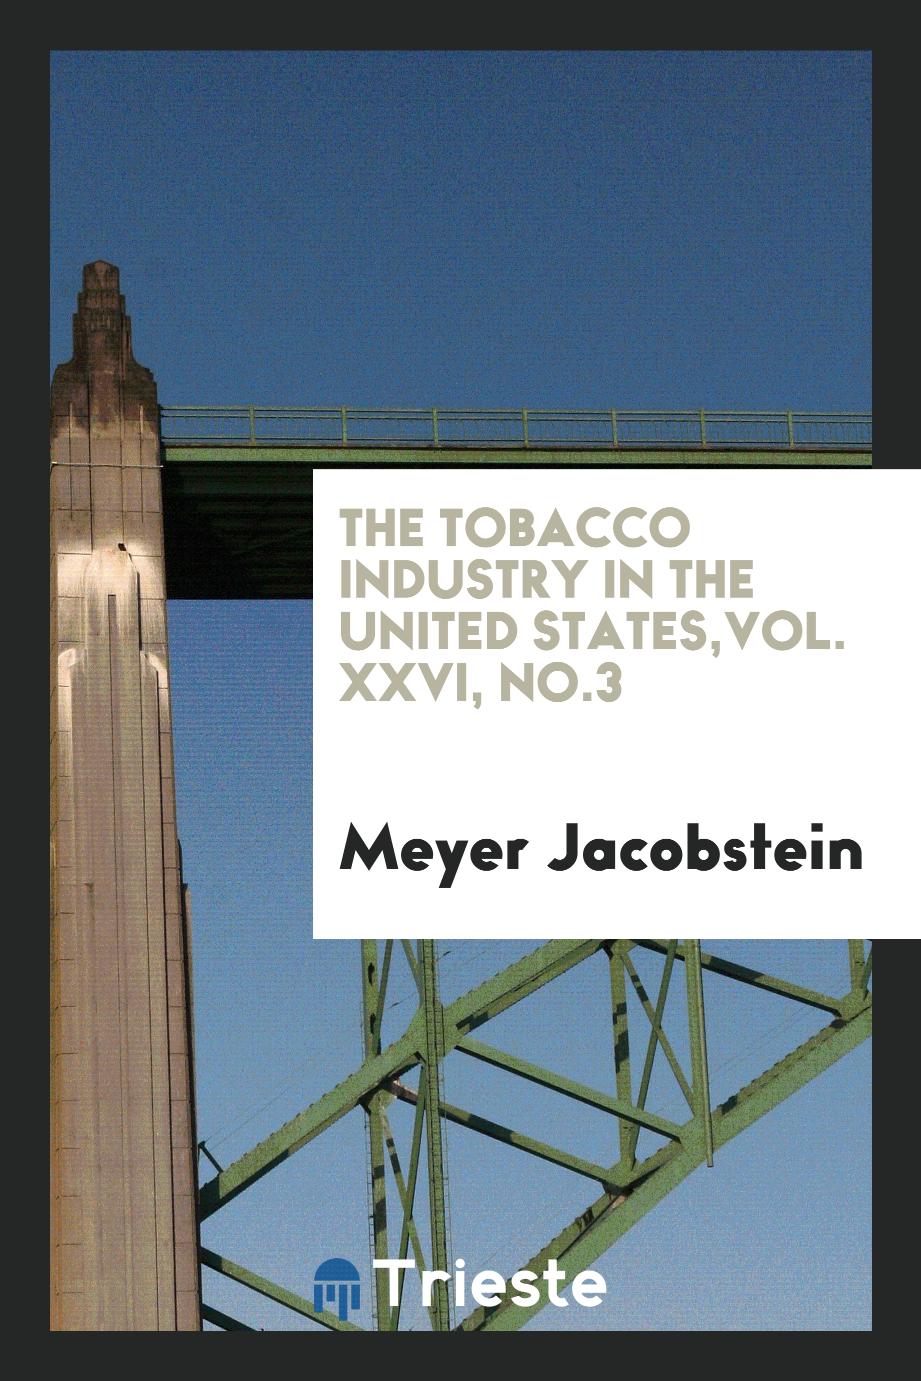 The tobacco industry in the United States,Vol. XXVI, No.3